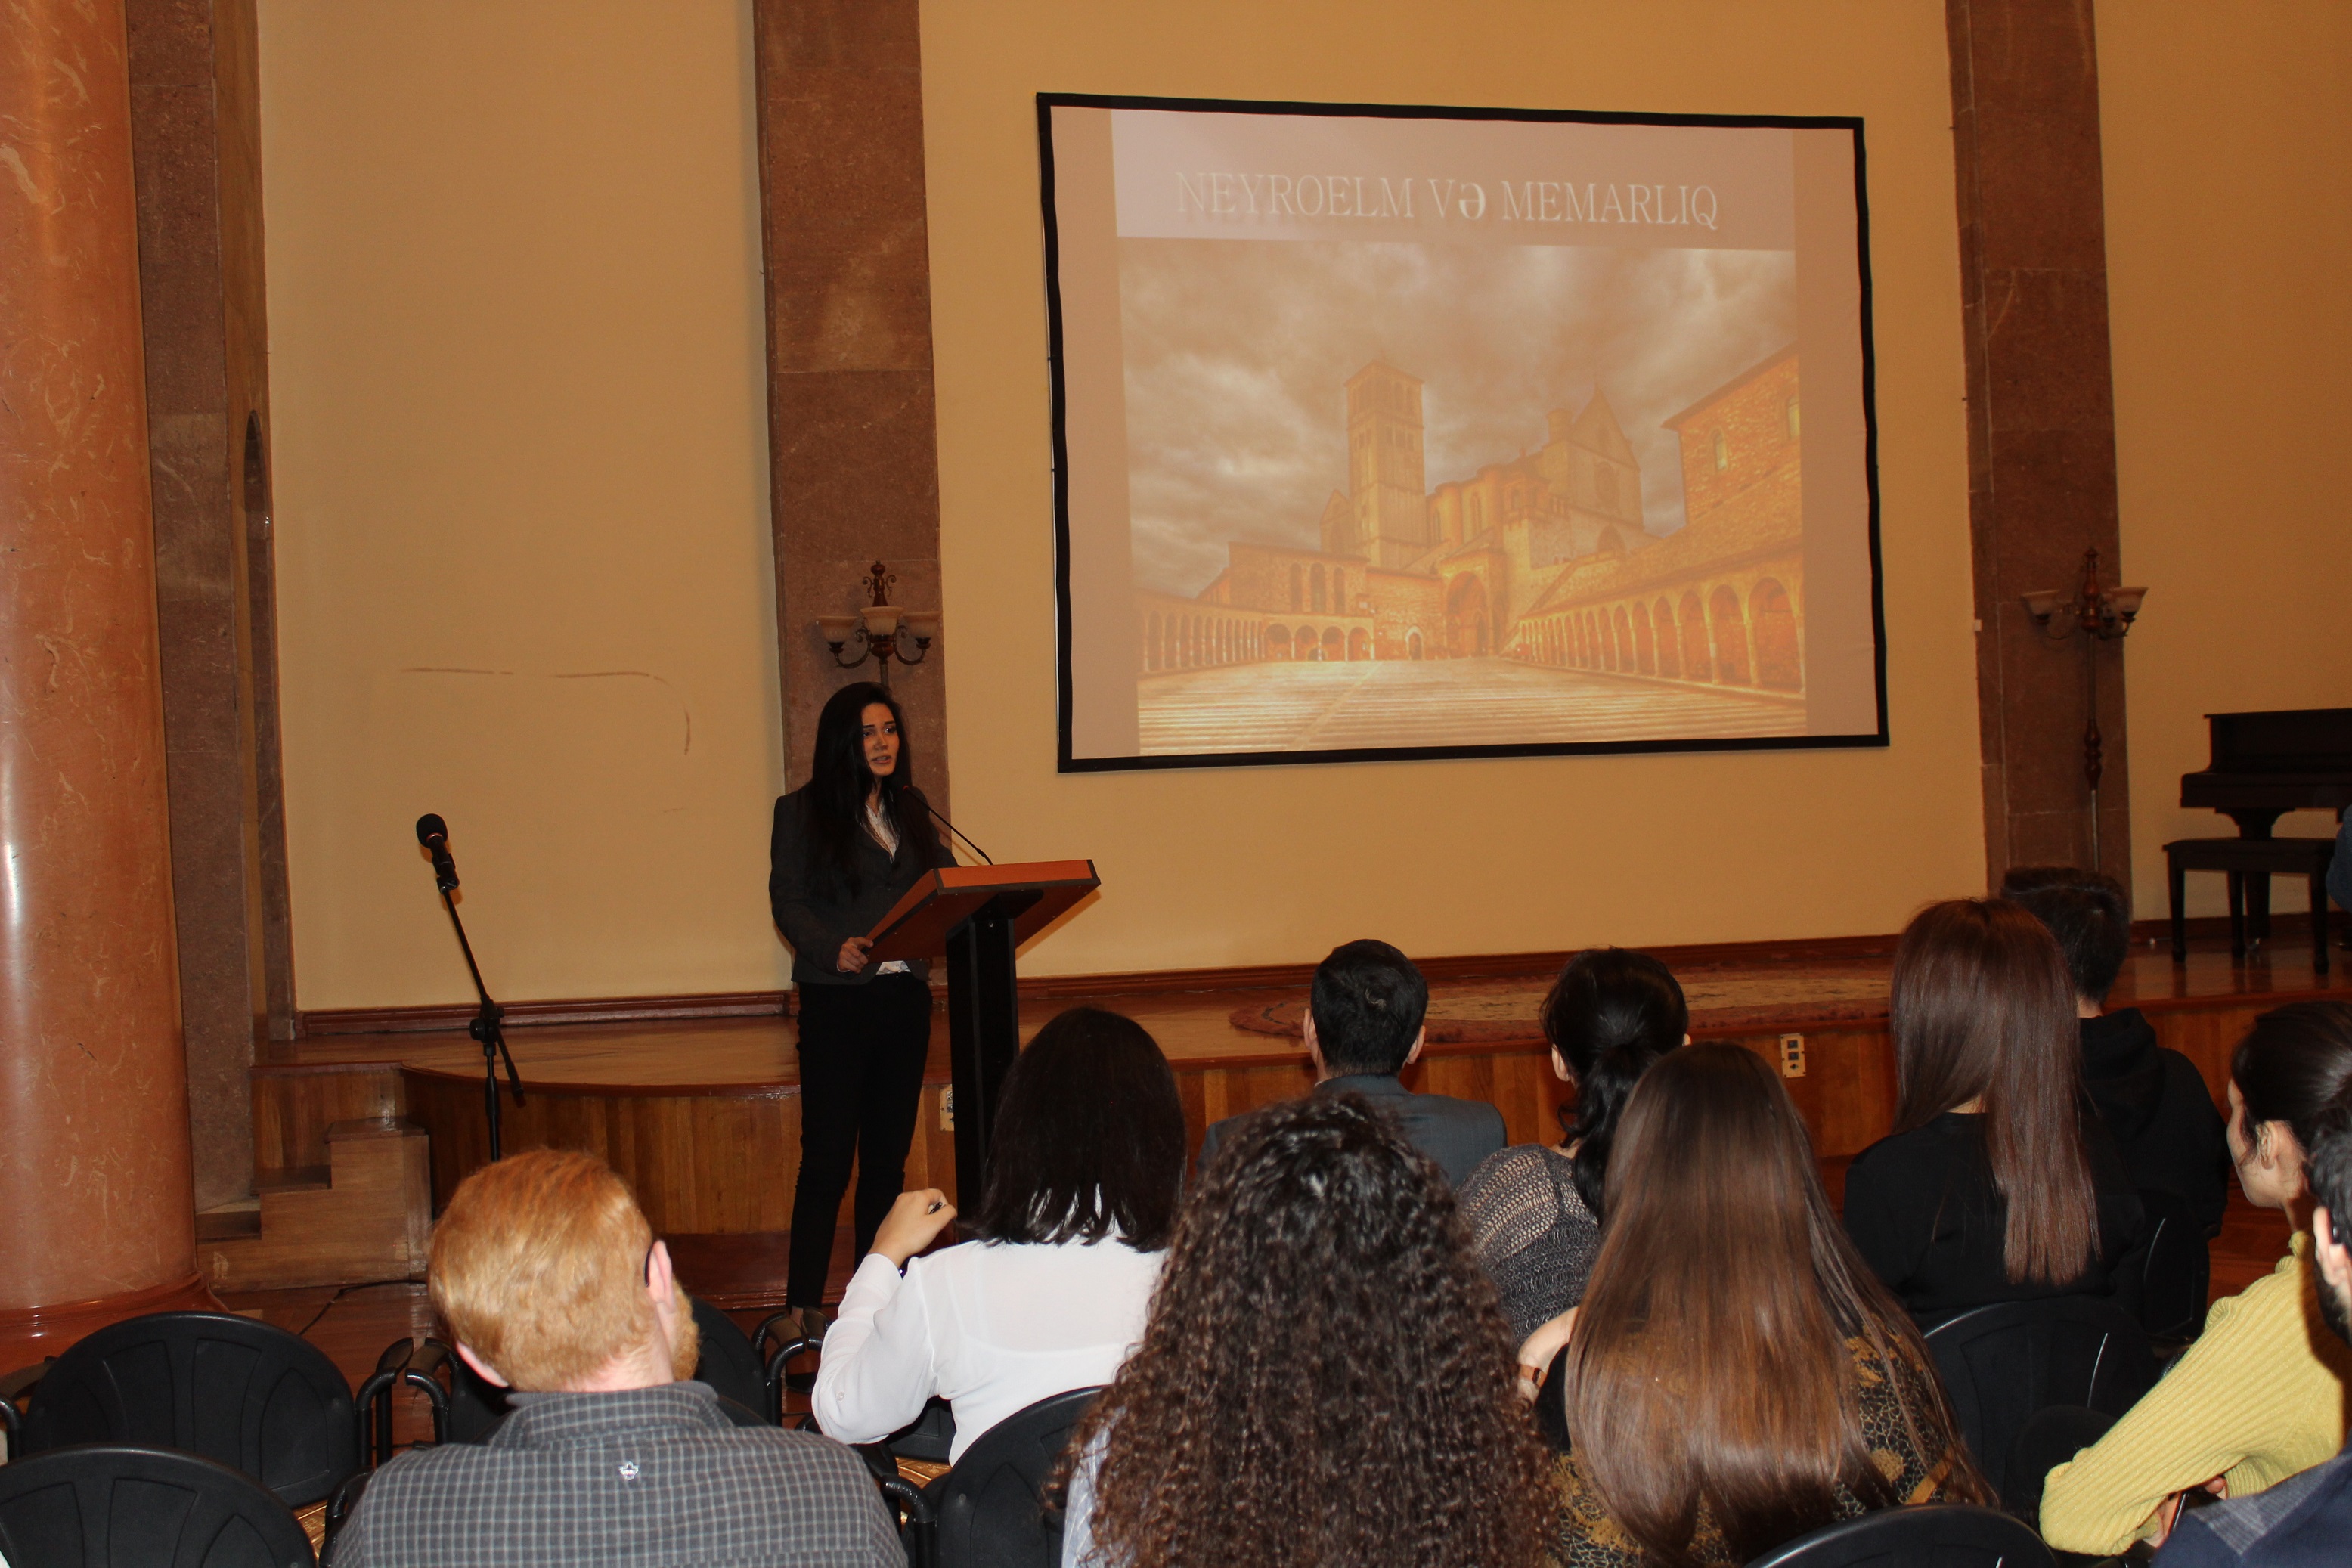 The seminar on "Neuroscience and Architecture" was held in the Assembly Hall of the Museum Center